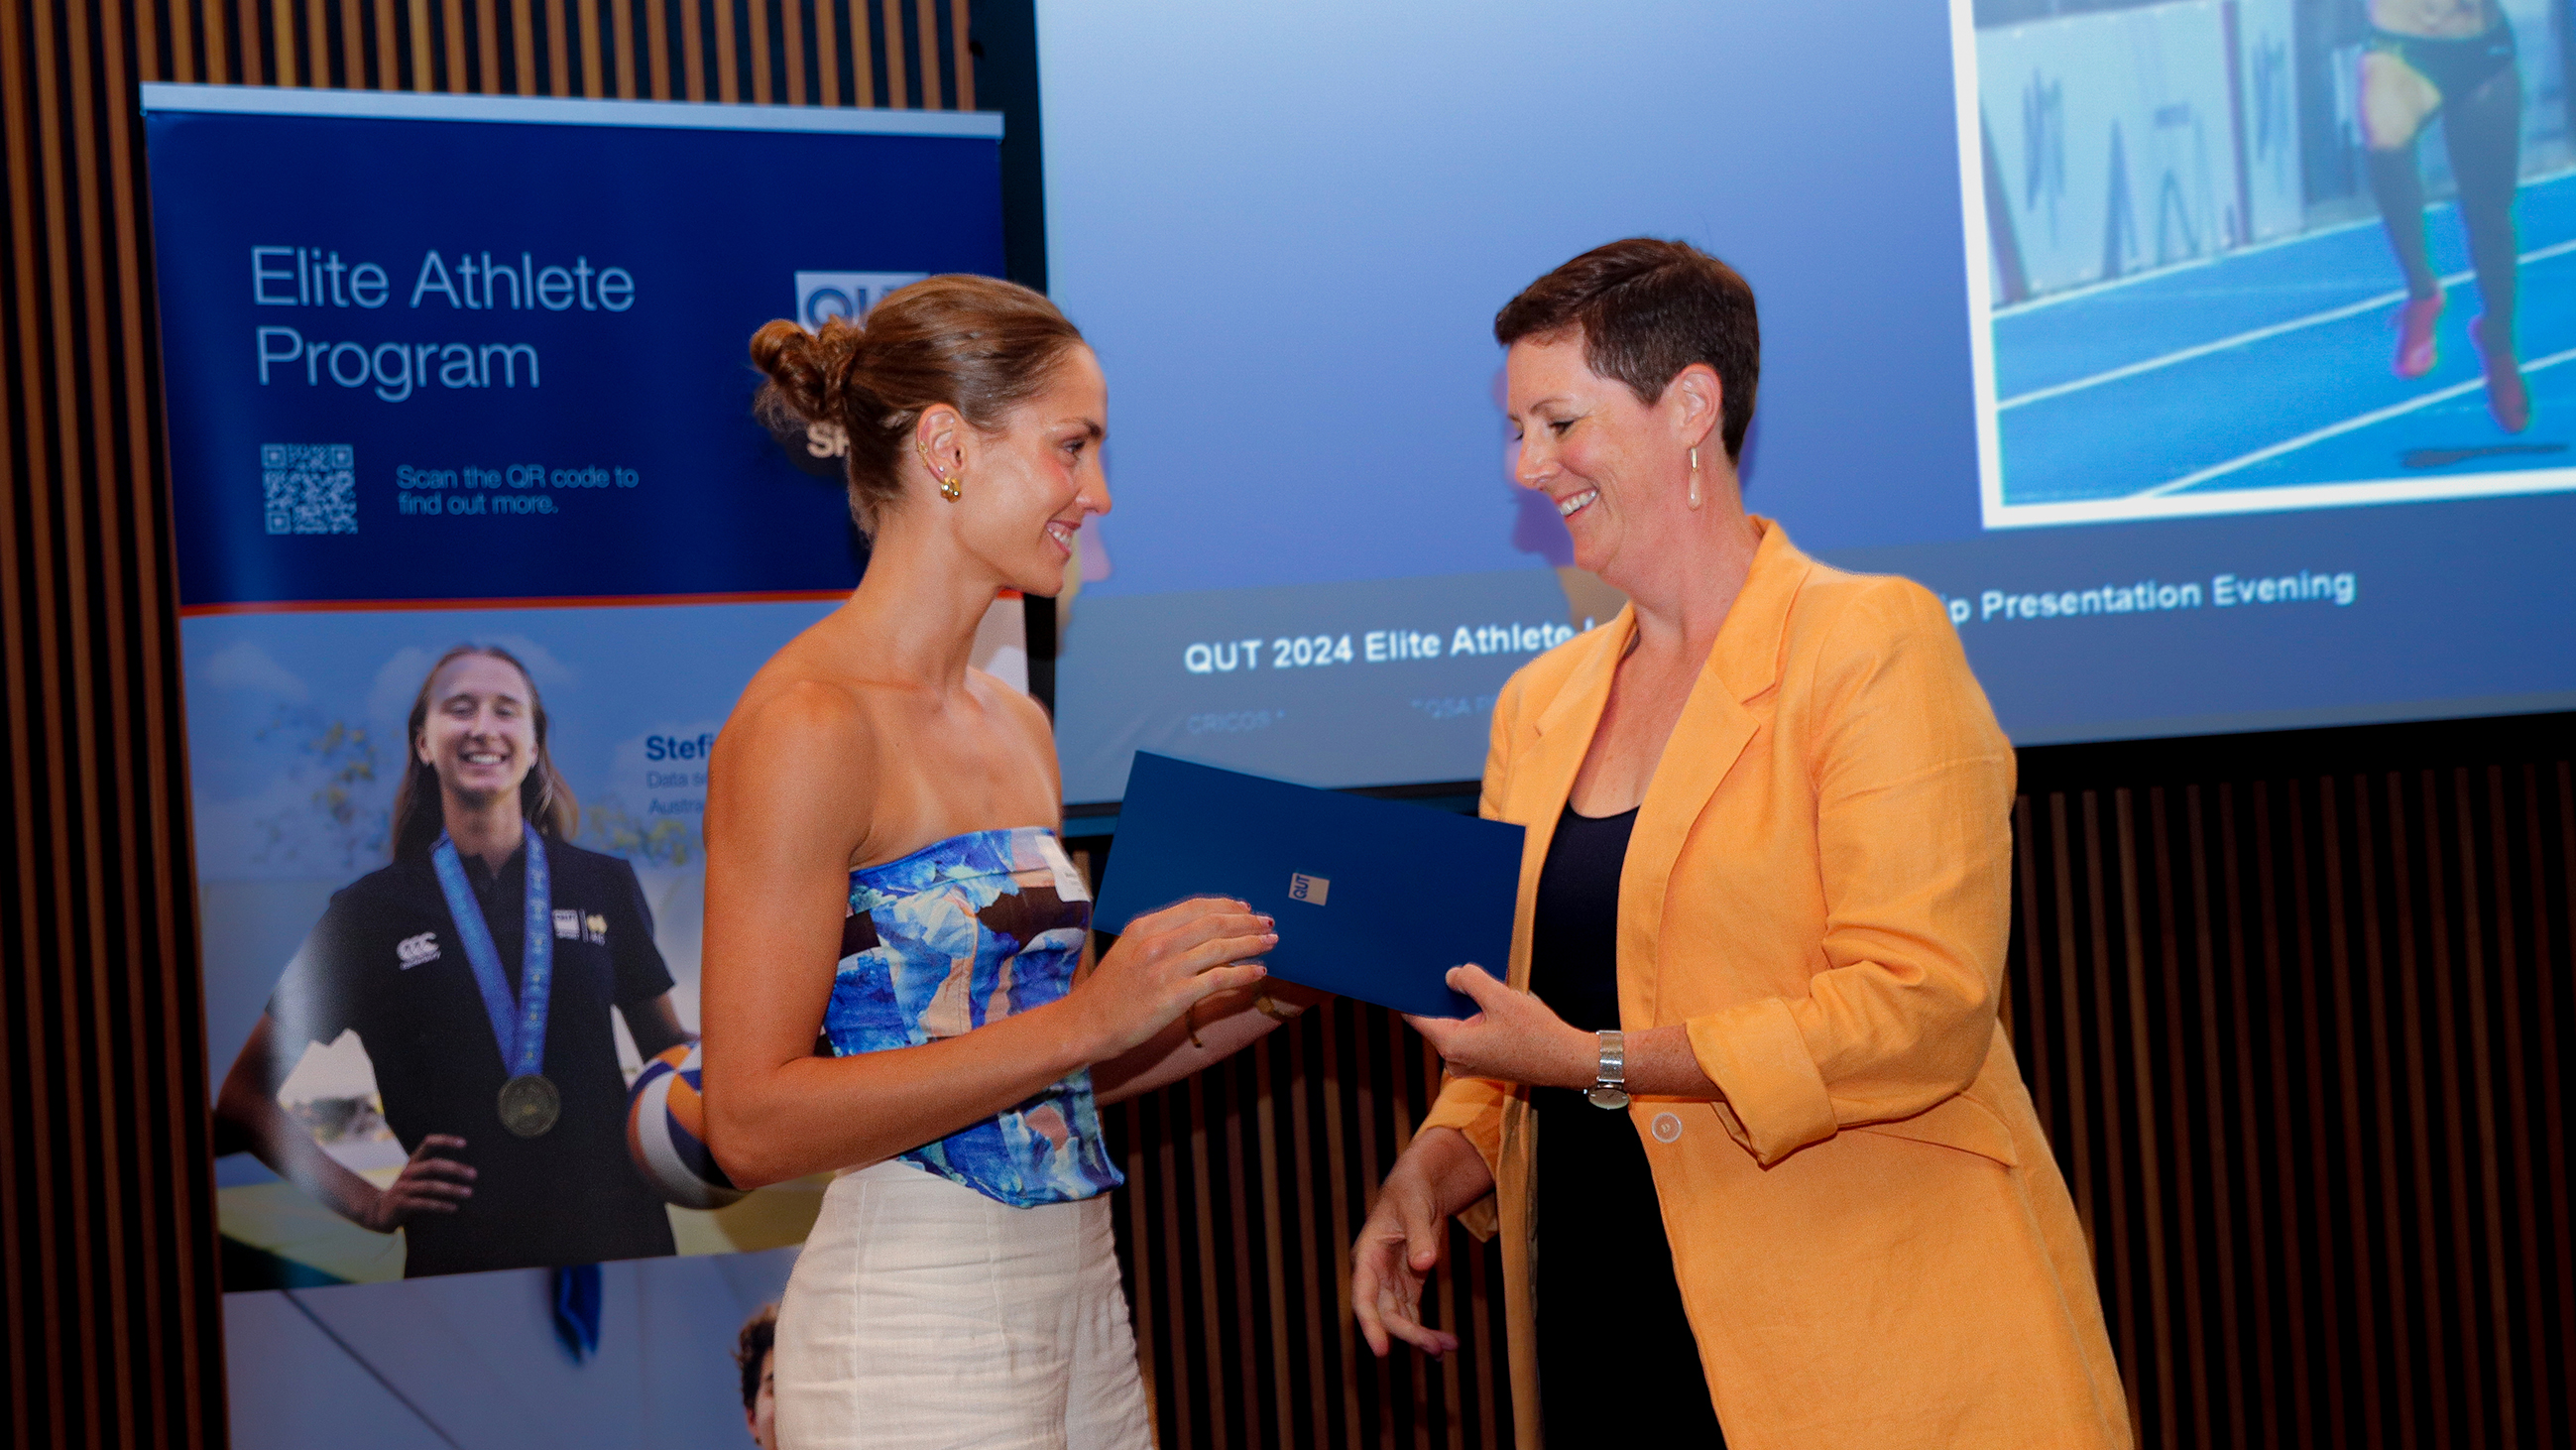 Runner Monique Hanlon recieves an envelope from the AIS National Wellbeing Manager Sonia Boland on stage at the QUT Elite Athlete Program presentation evening